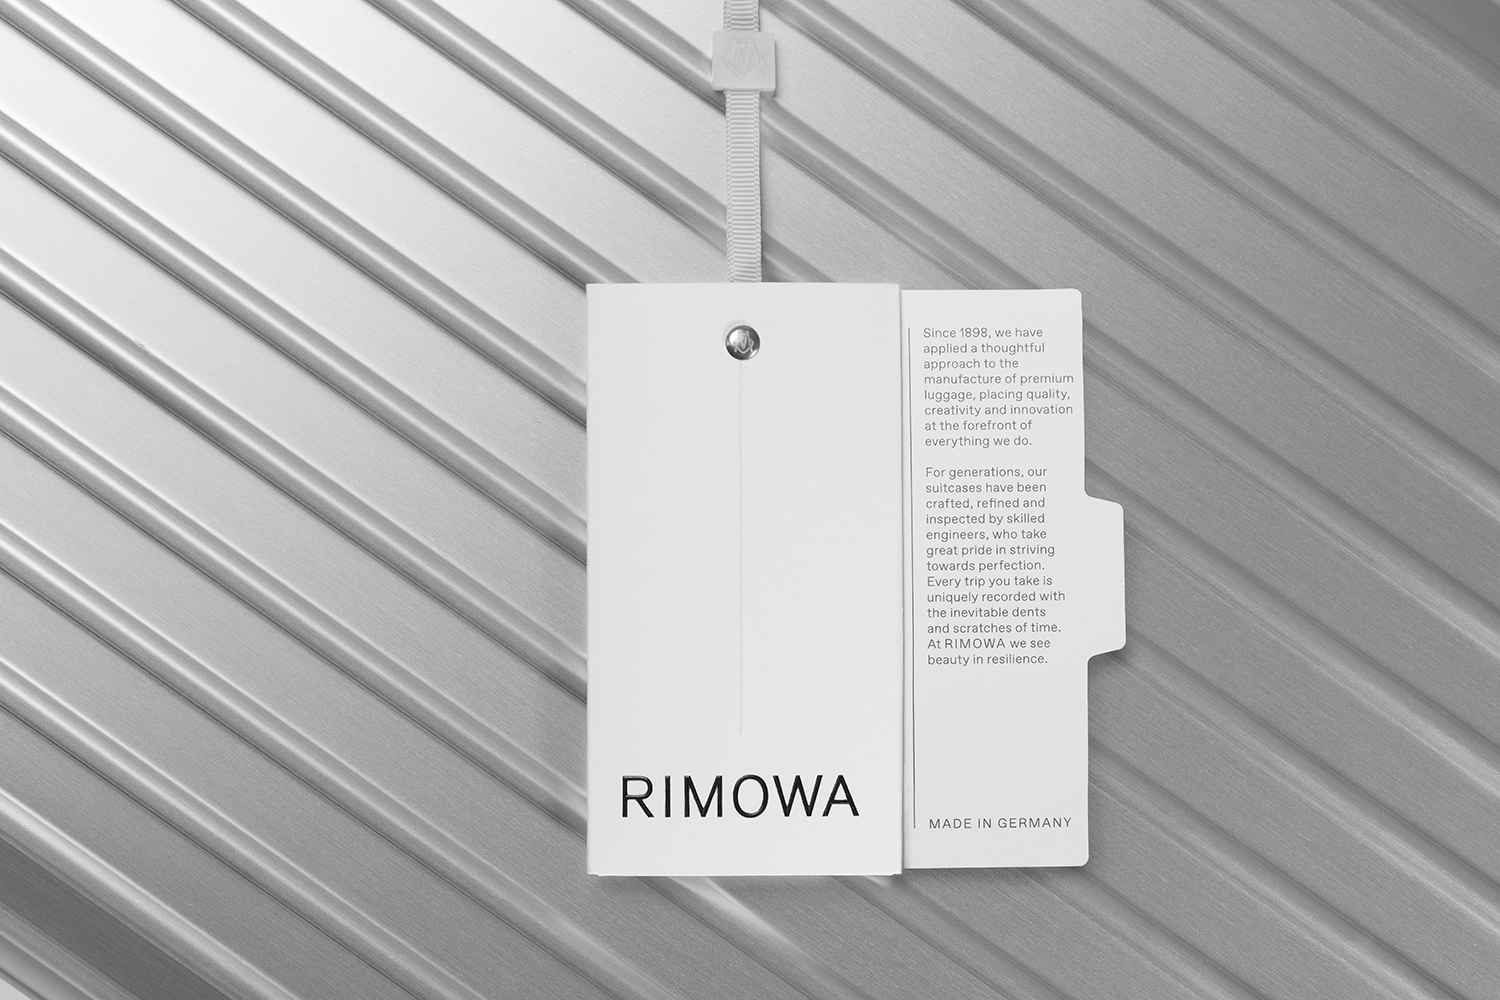 Graphic identity and tag designed by Commission studio for functional luxury luggage manufacturer Rimowa